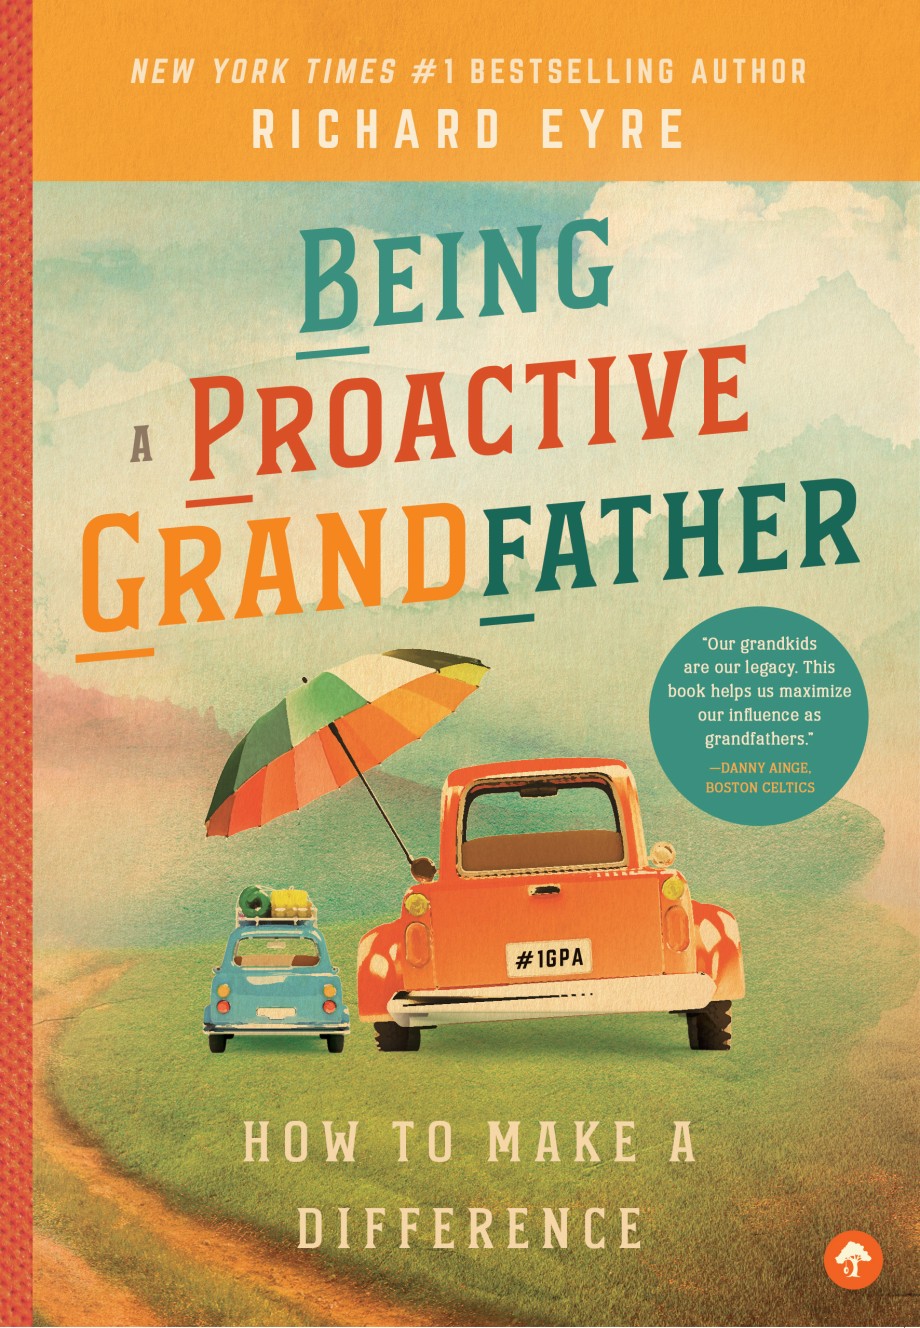 Being a Proactive Grandfather How to Make A Difference